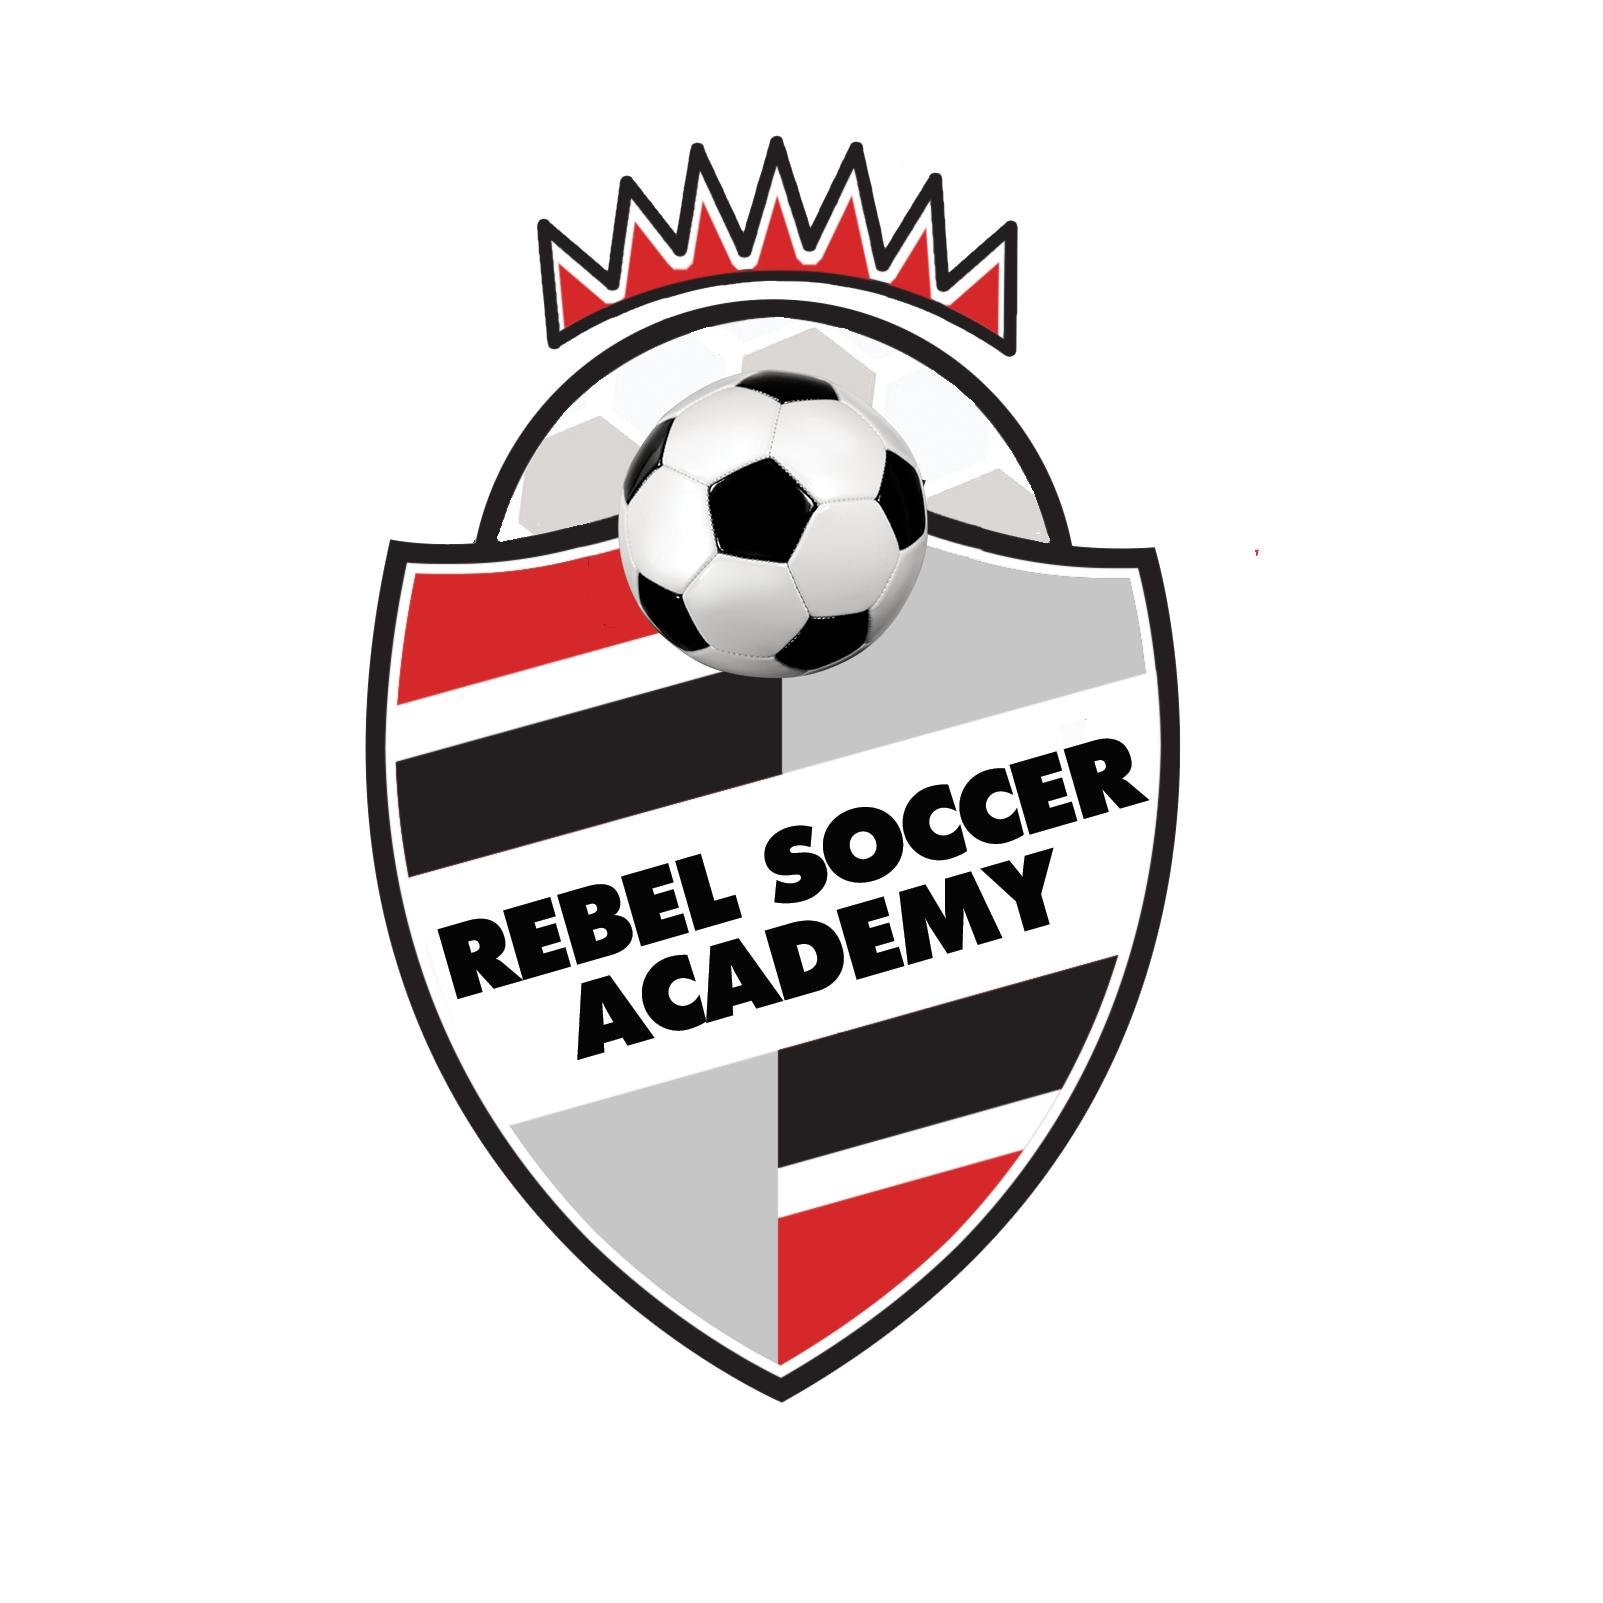 Rebel Soccer Academy brings to you the best Youth Camps and College ID Camps in the Las Vegas Area!